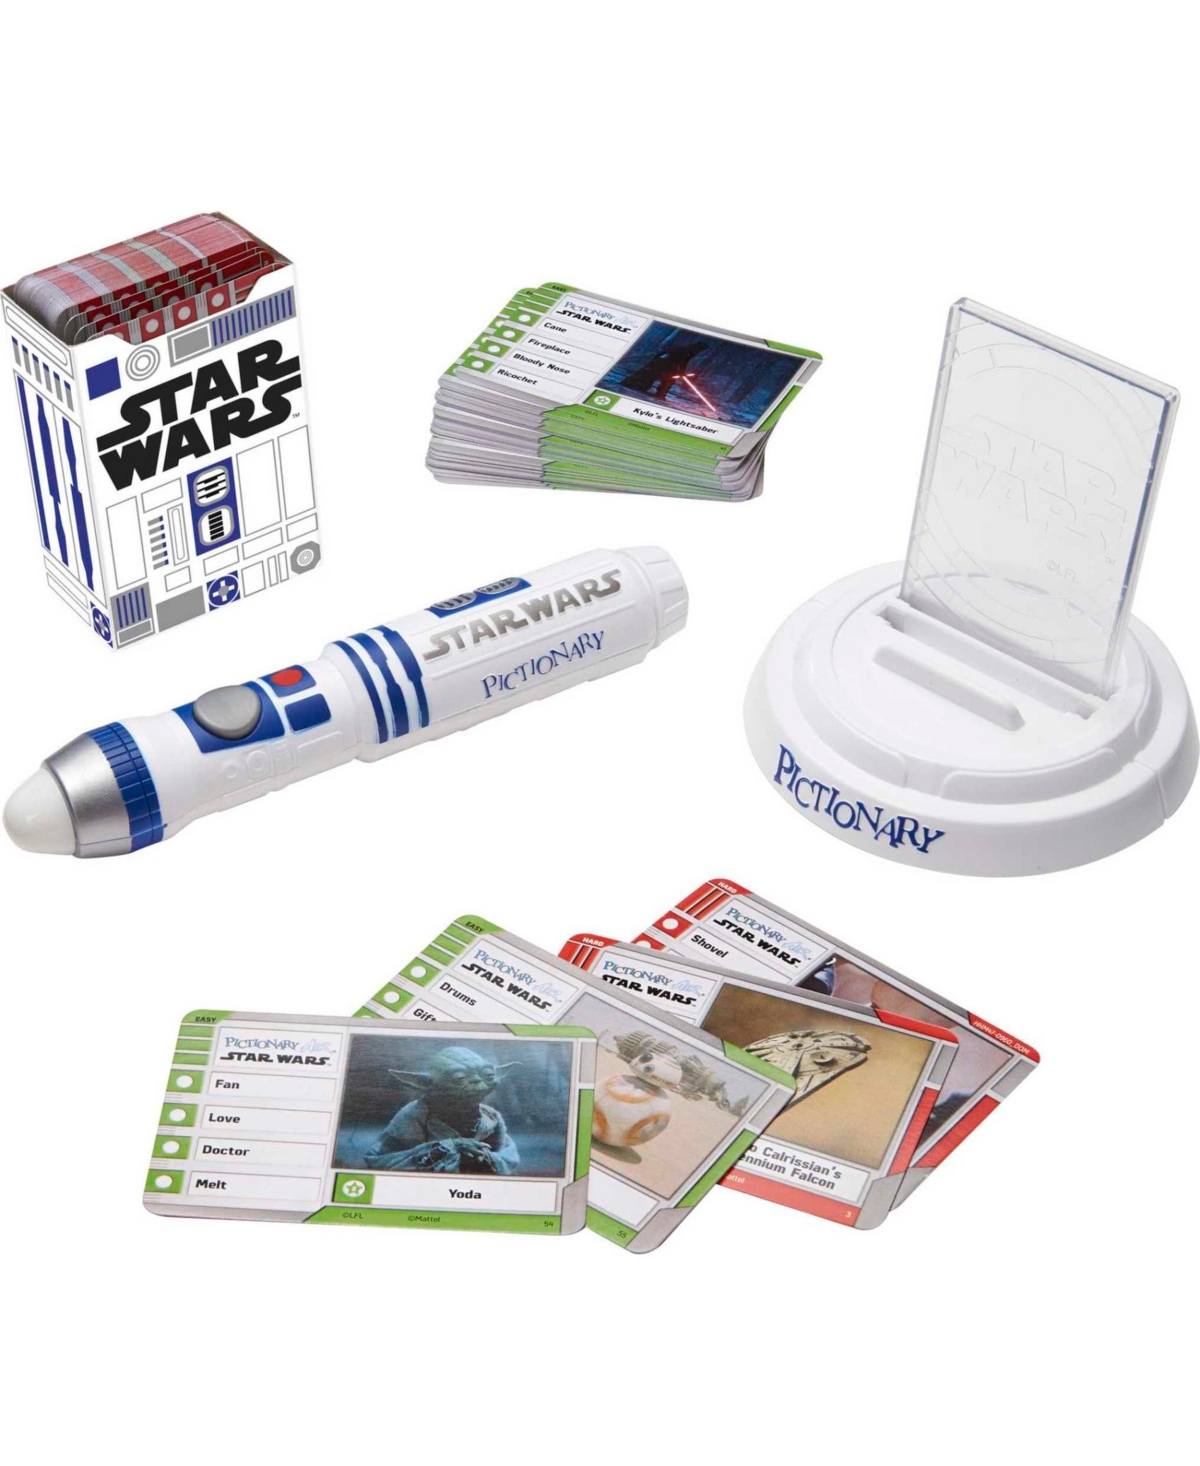 Shop Mattel Pictionary Air Star Wars Family Drawing Game For Kids And Adults In Multi